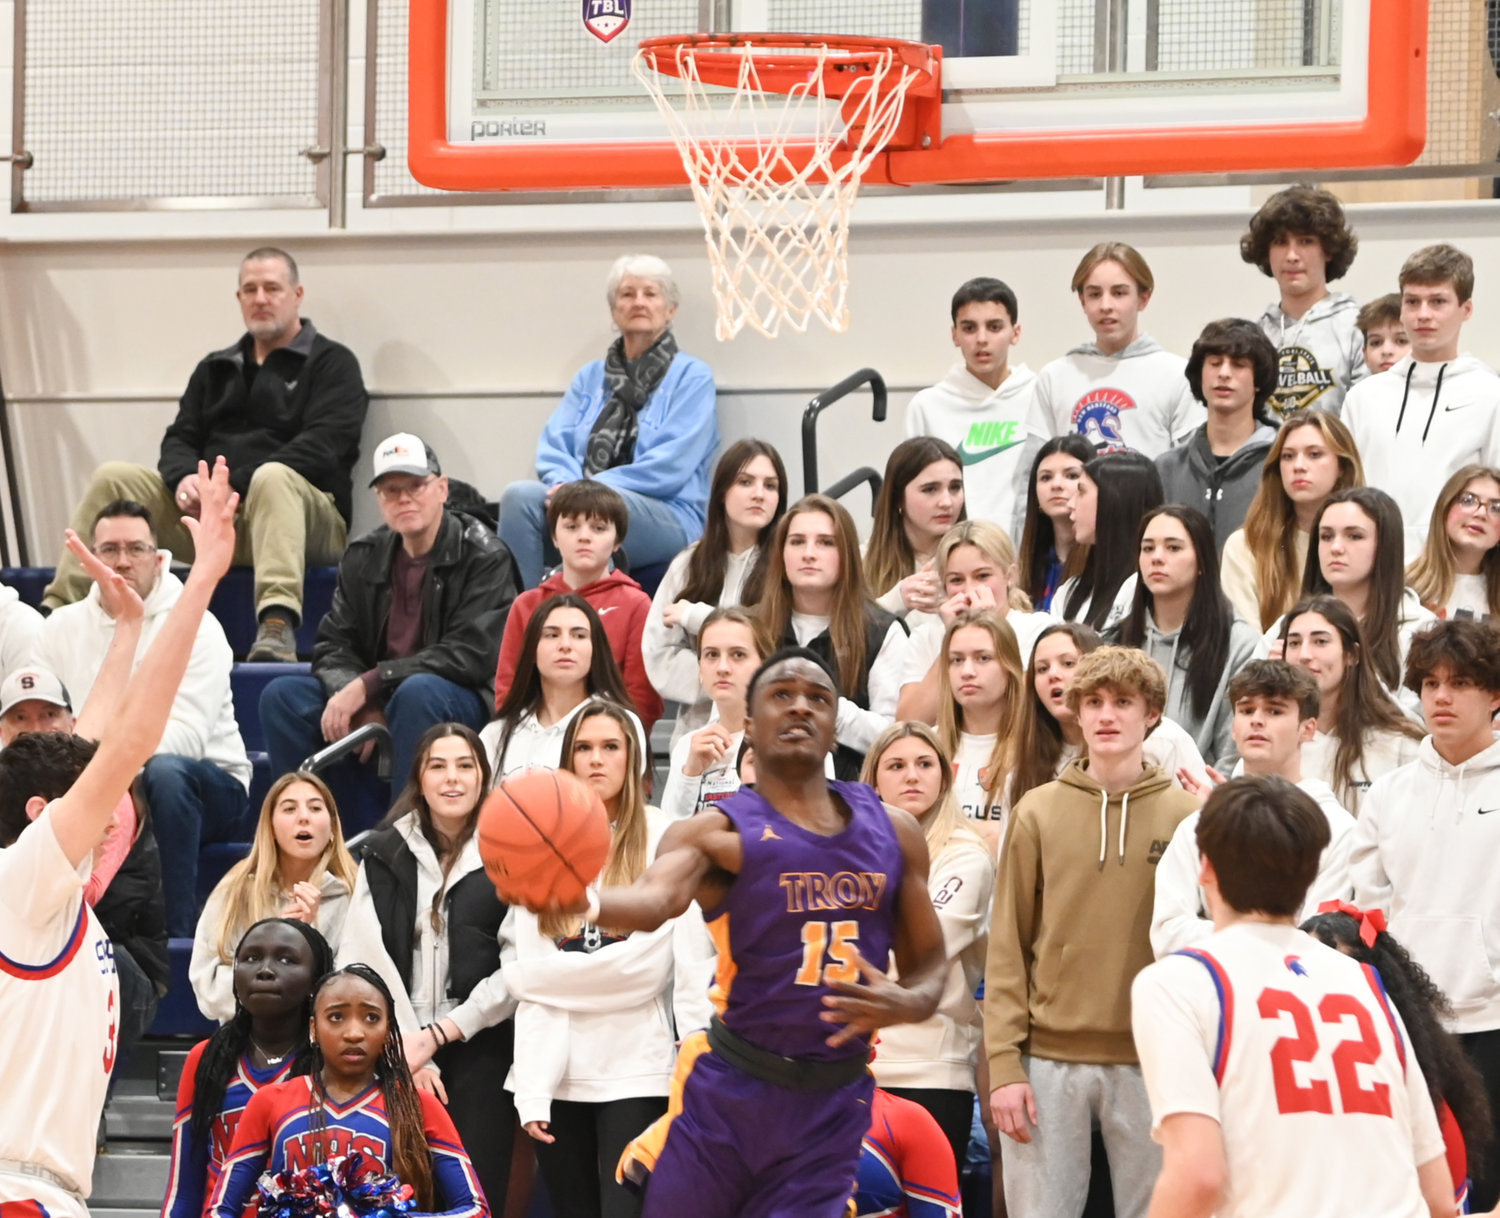 Troy's Damarian Tucker makes a nifty move to the basket against New Hartford on Wednesday in a Class A subregional final at Liverpool High School. New Hartford fans look on.